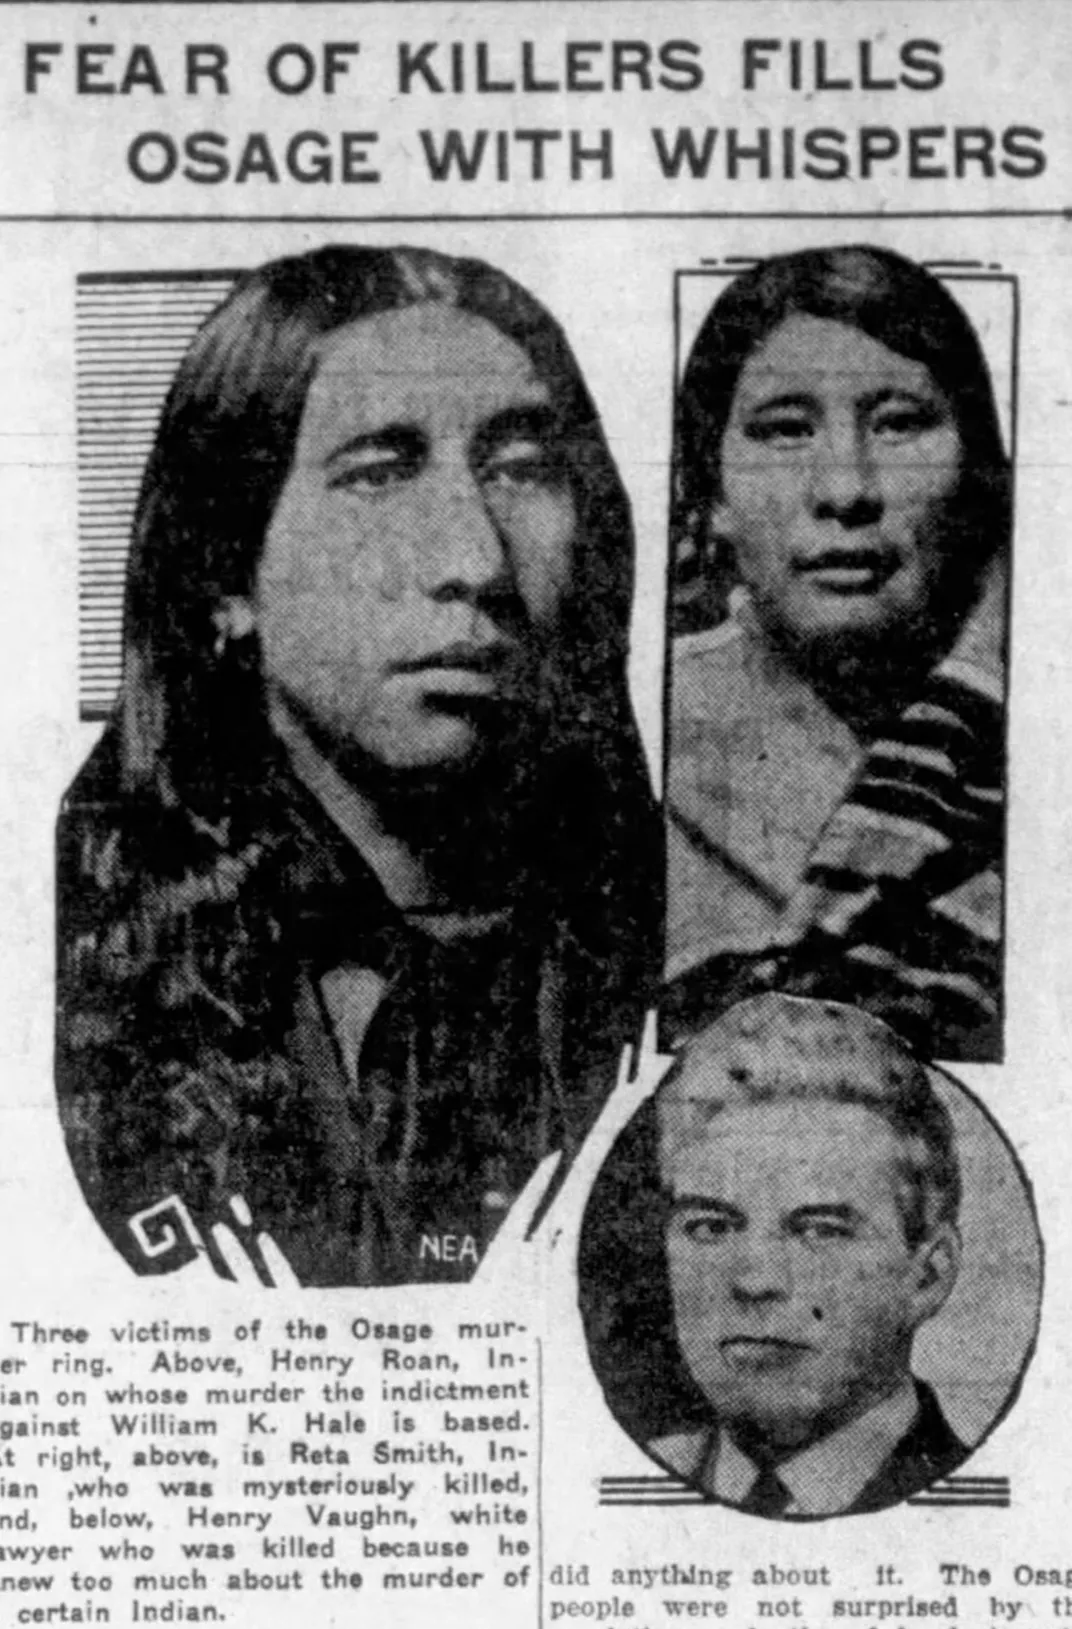 A newspaper article featuring photos of Henry Roan, Rita Smith and W.W. Vaughan